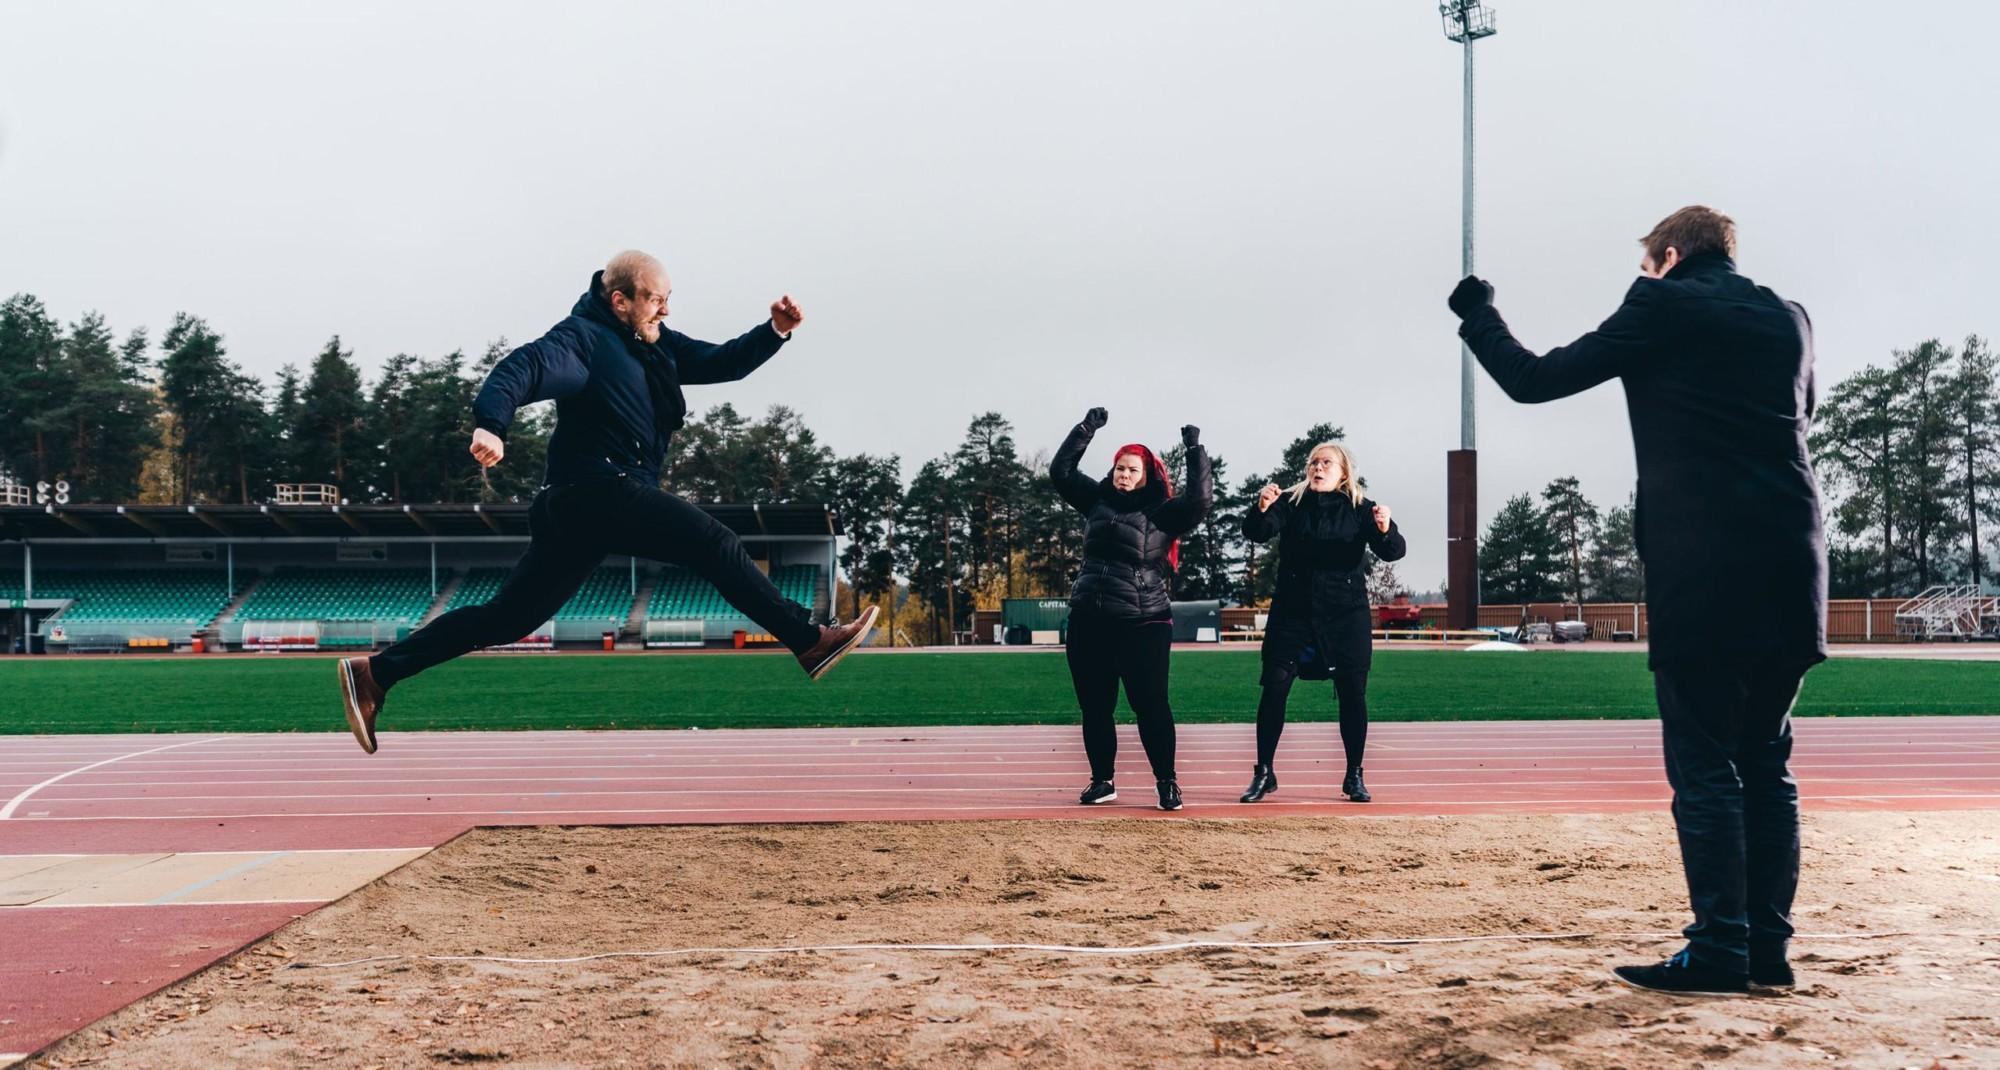 A man doing a long jump while others cheer for him.